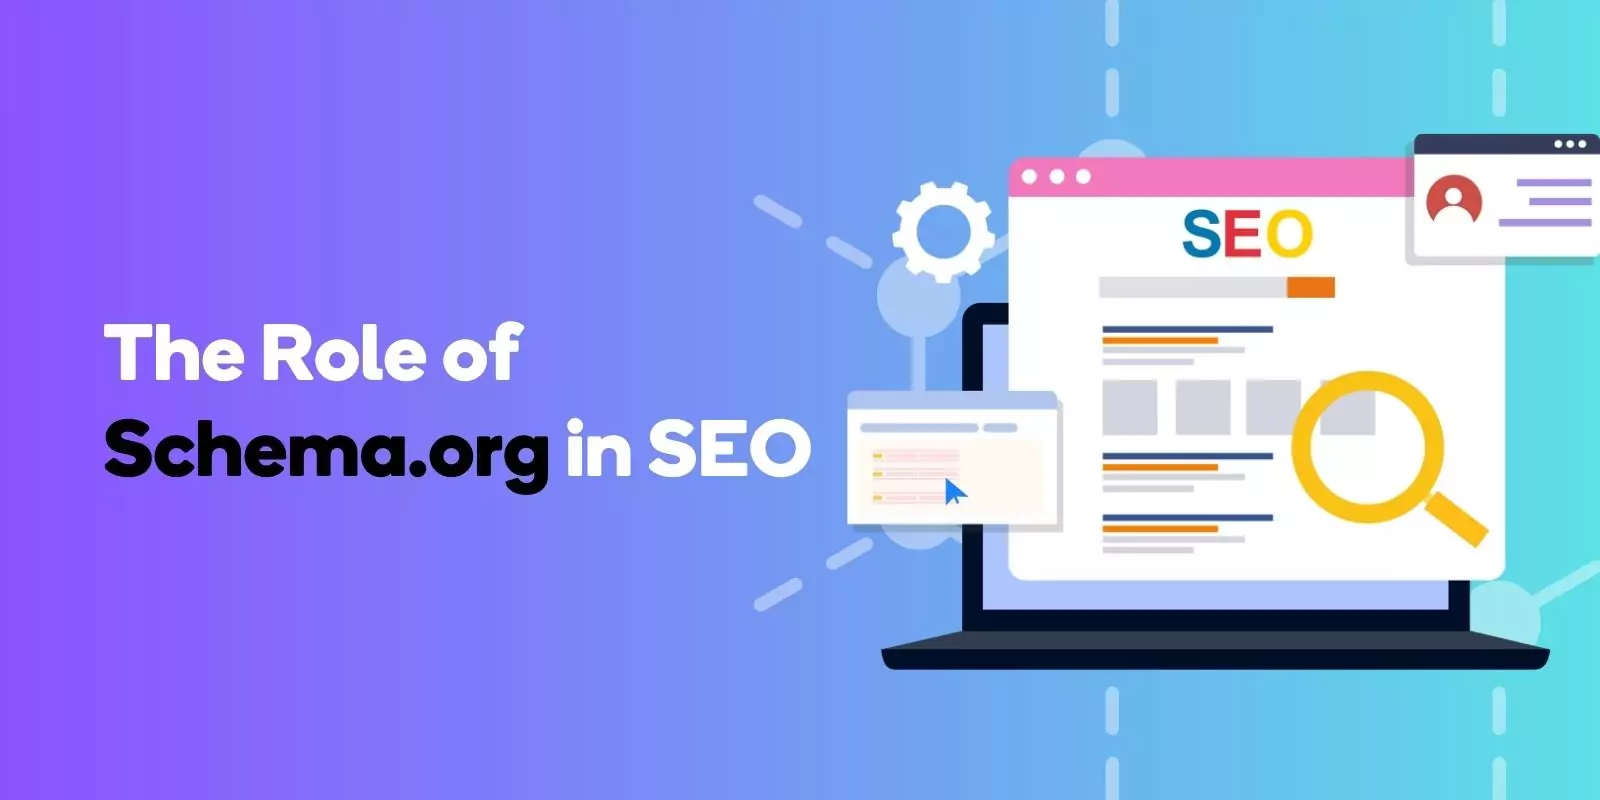 The Role of Schema.org in SEO